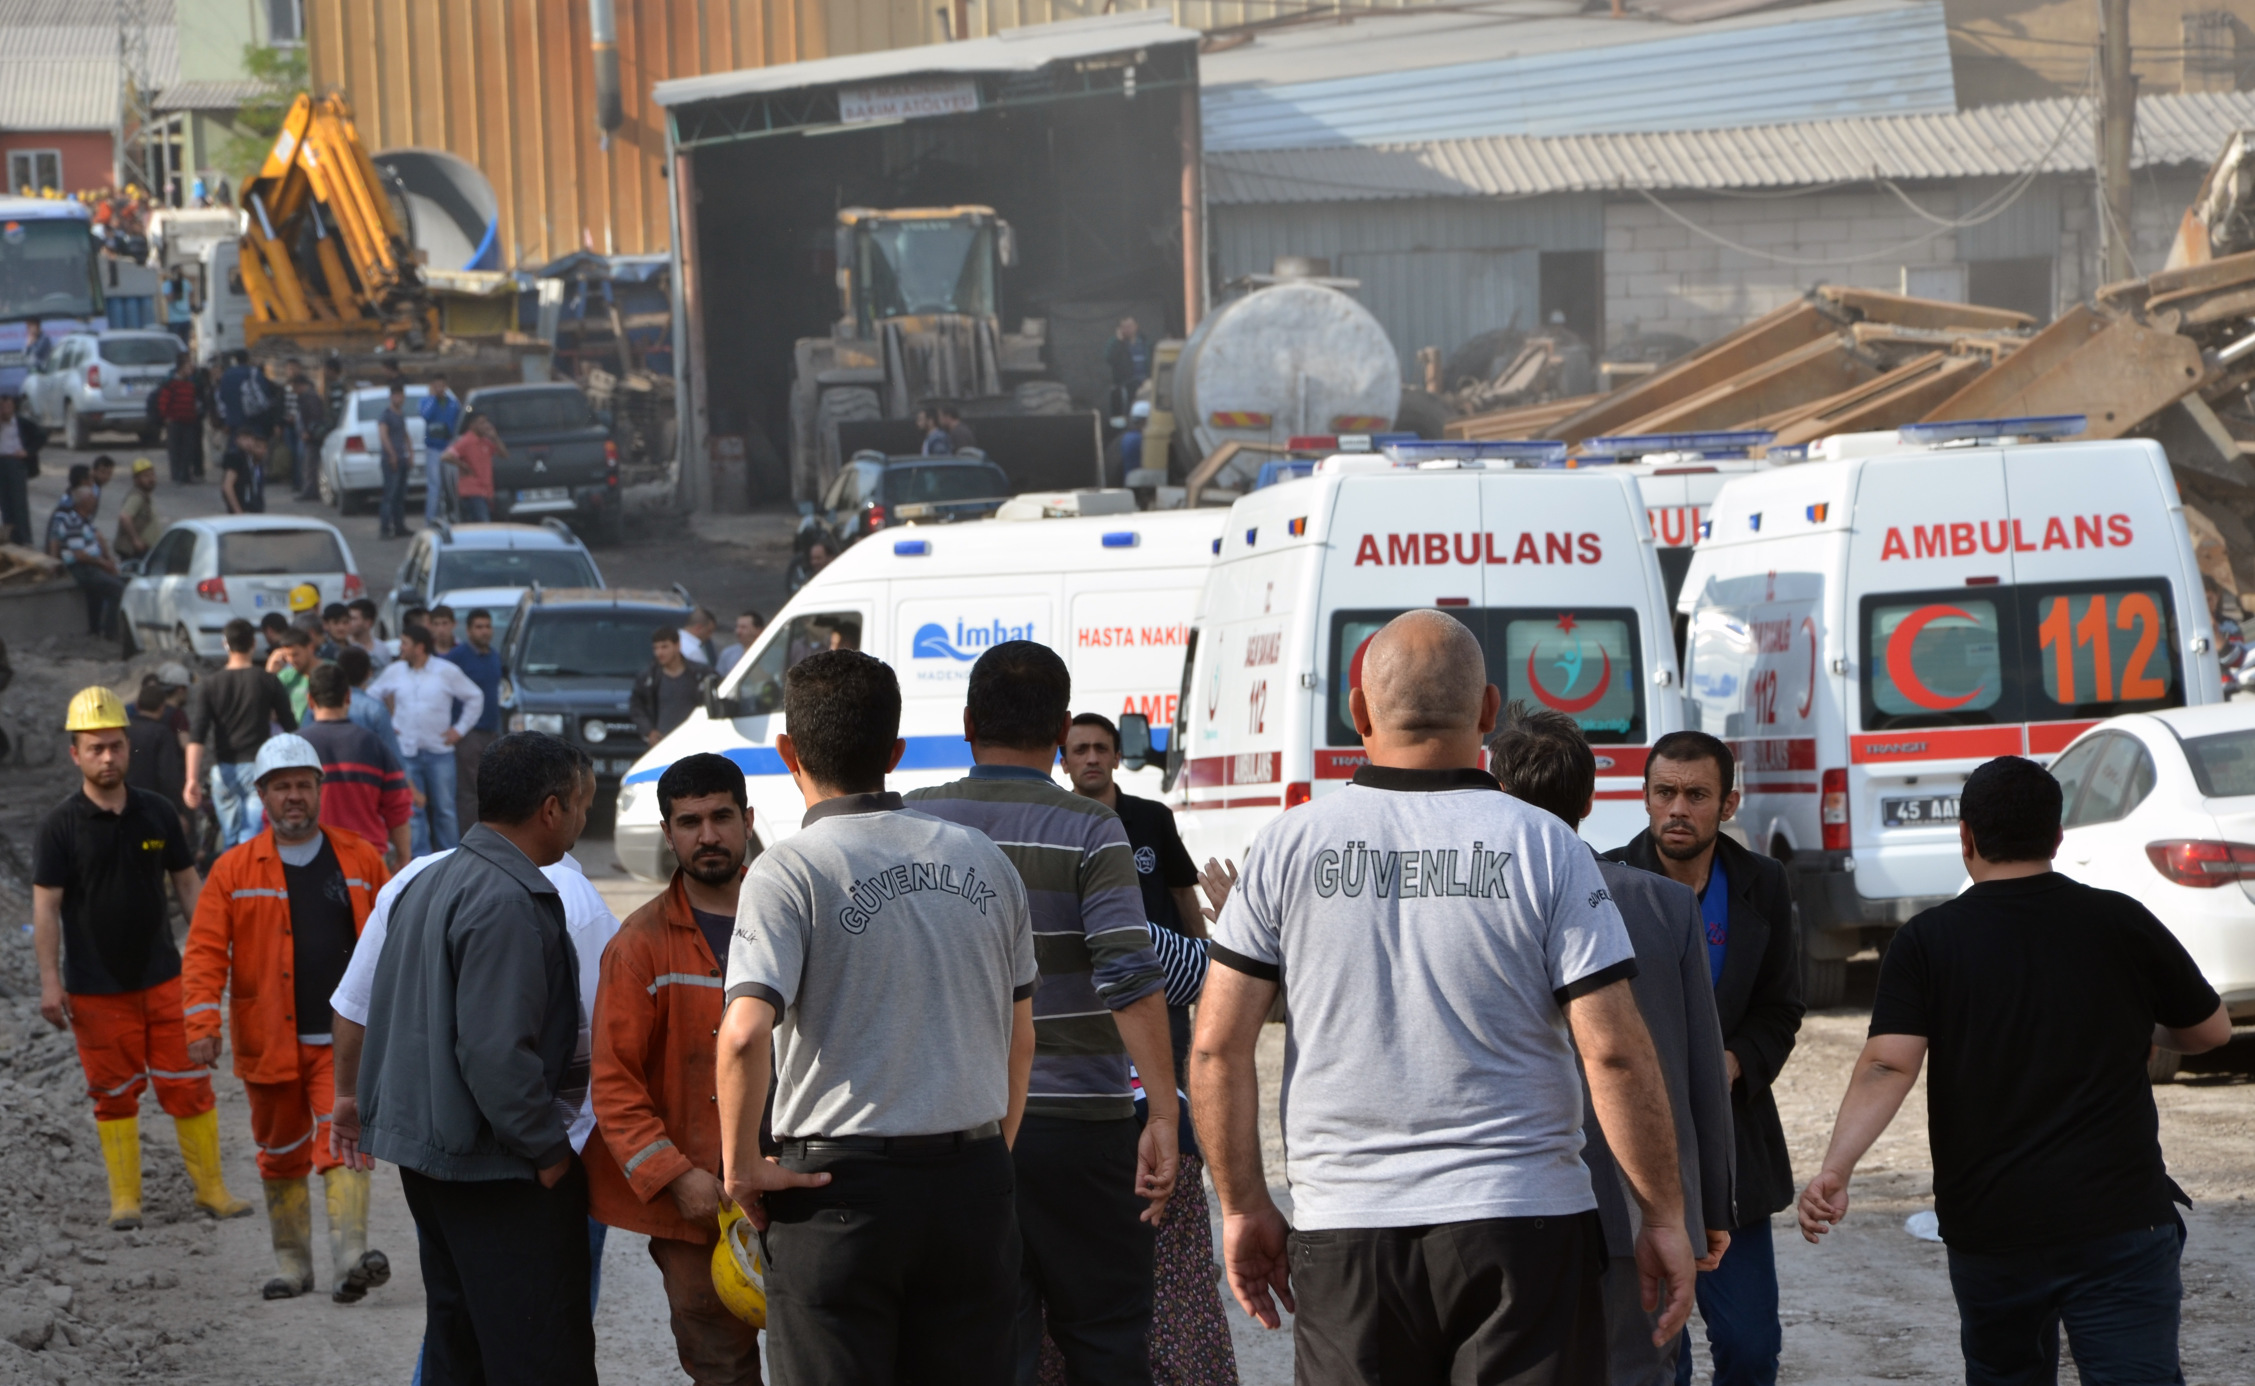 Rescue workers and ambulances at the entrance of a coal mine in Soma, western Turkey, after an explosion took place. Photo: AP